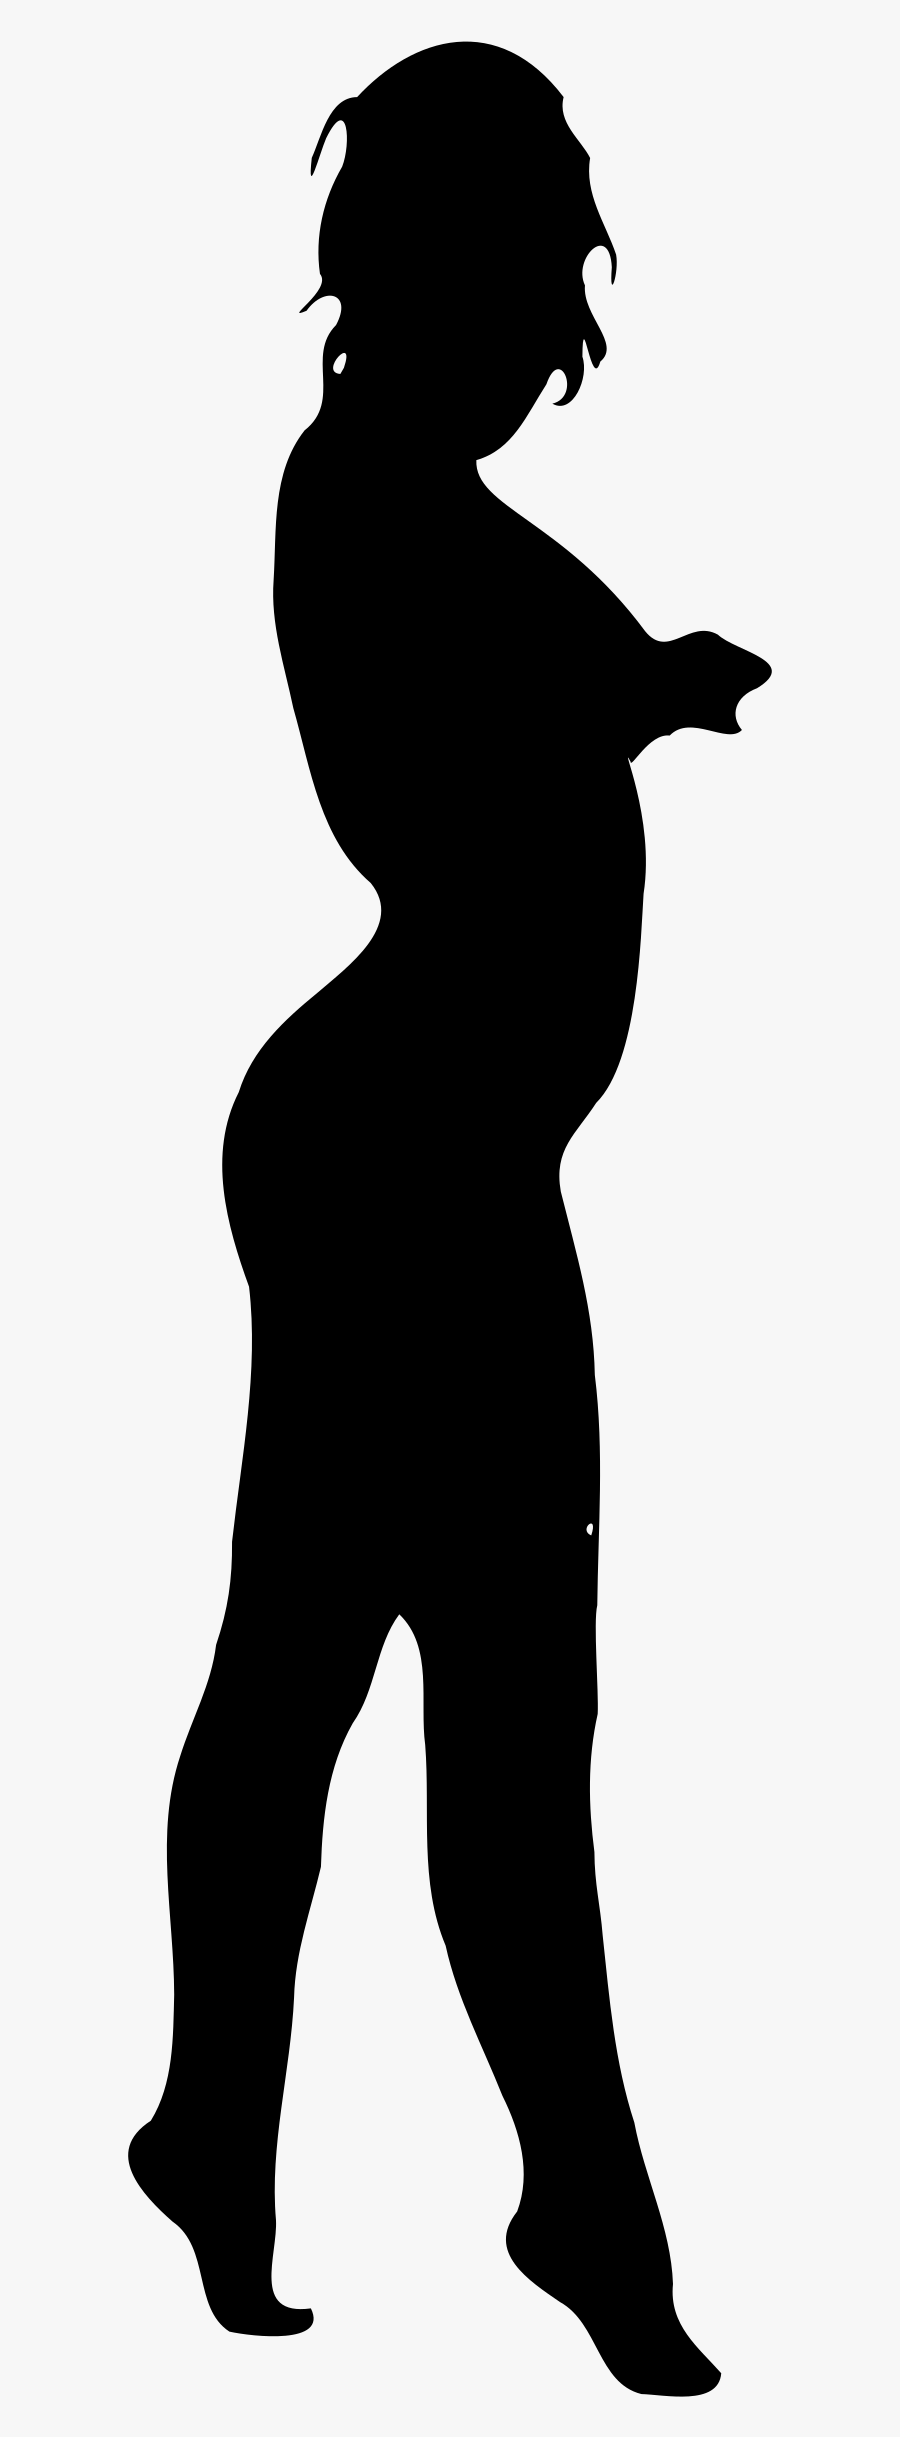 Exercise Clipart Shadow - Women Shape Black And White, Transparent Clipart